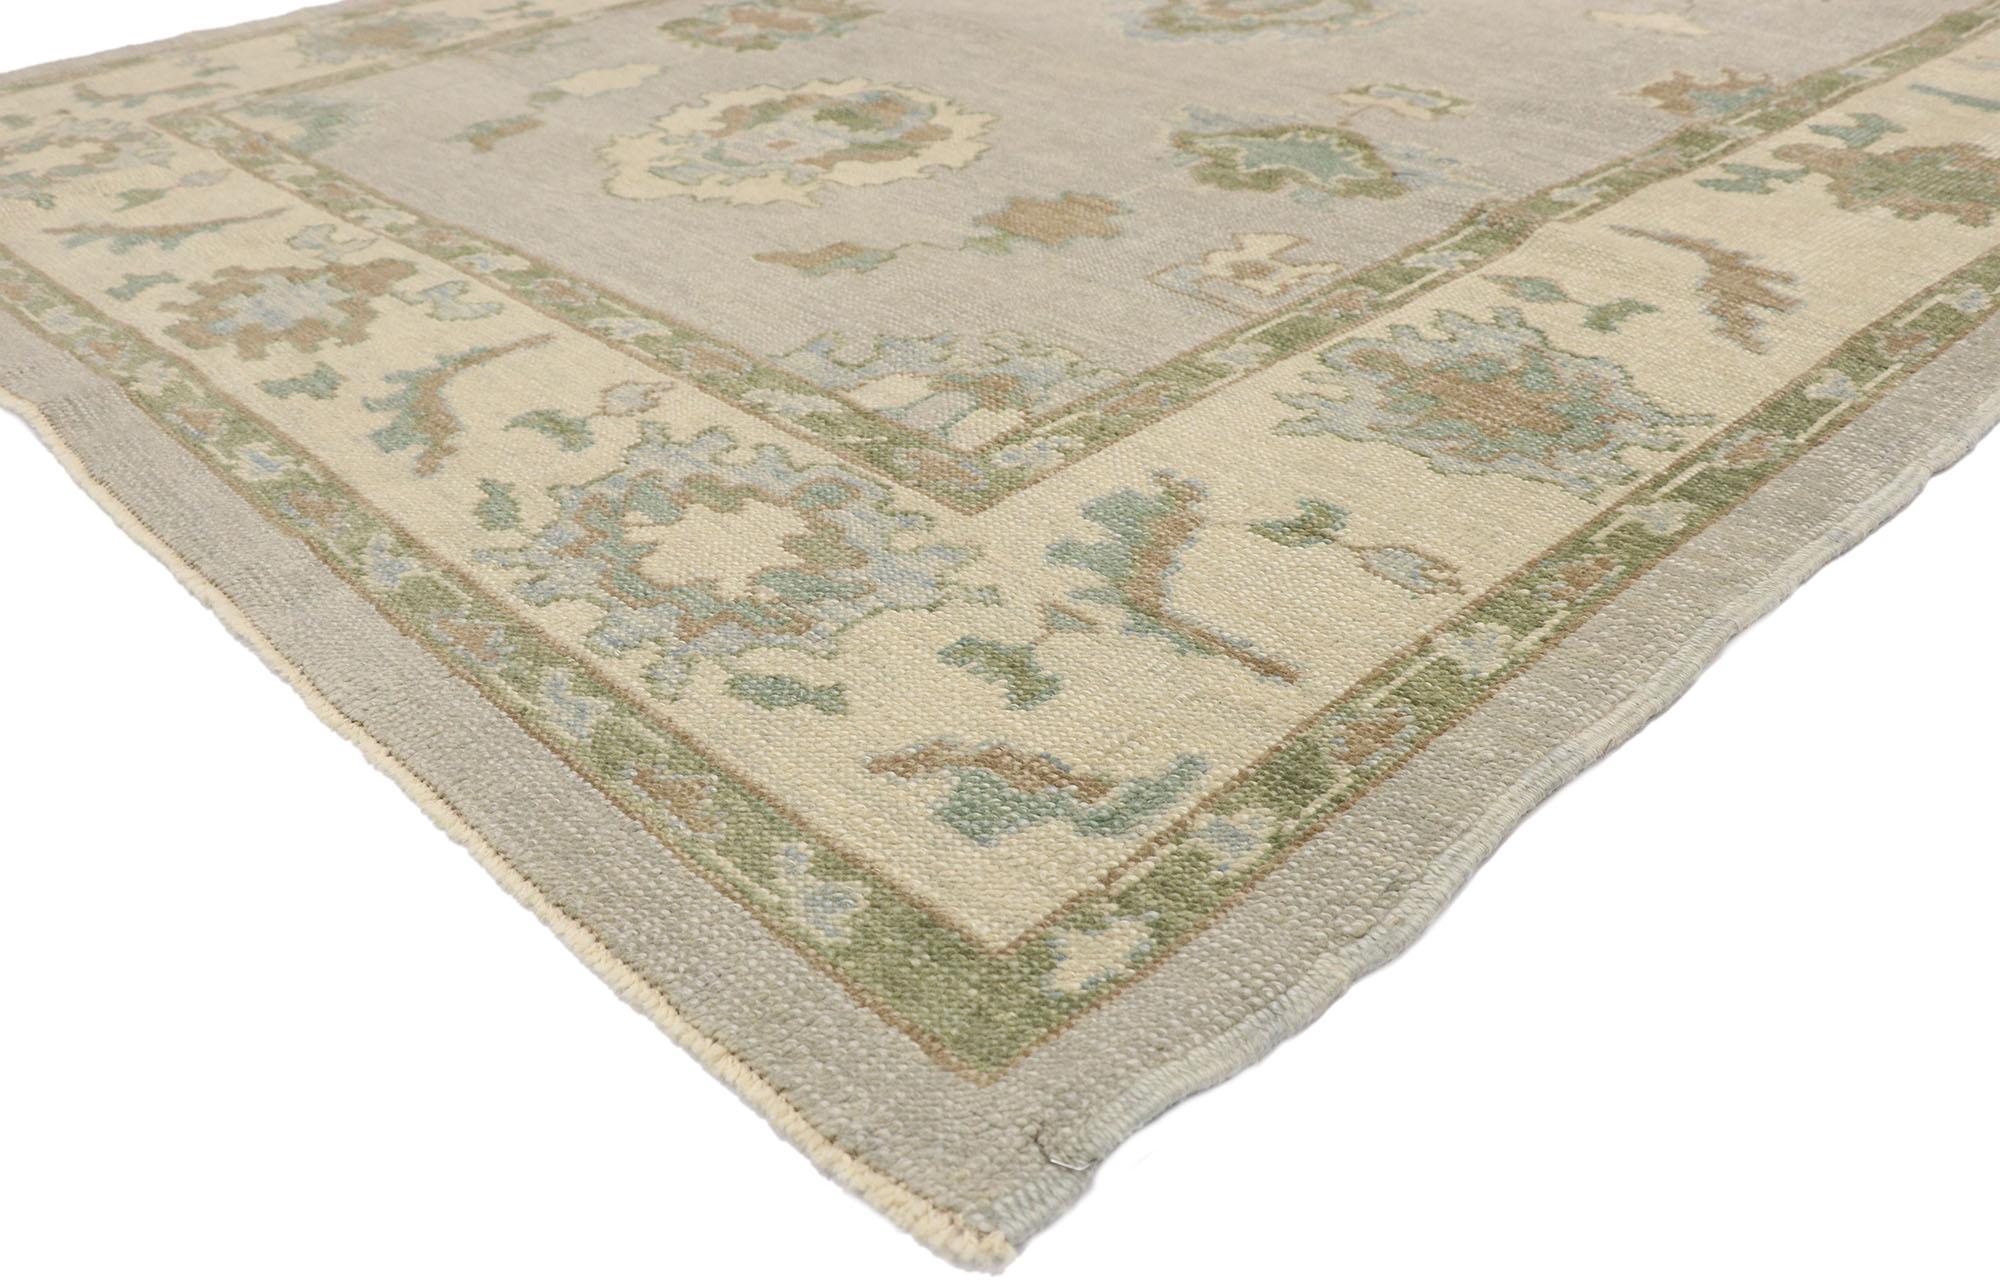 52796 Modern Oushak Turkish Rug, 06'04 x 09'08. Immerse your space in the gentle embrace of Biophilic Design with this hand-knotted wool Turkish Oushak rug, where an ethereal lightness meets contemporary elegance. This modern Oushak rug unfolds an